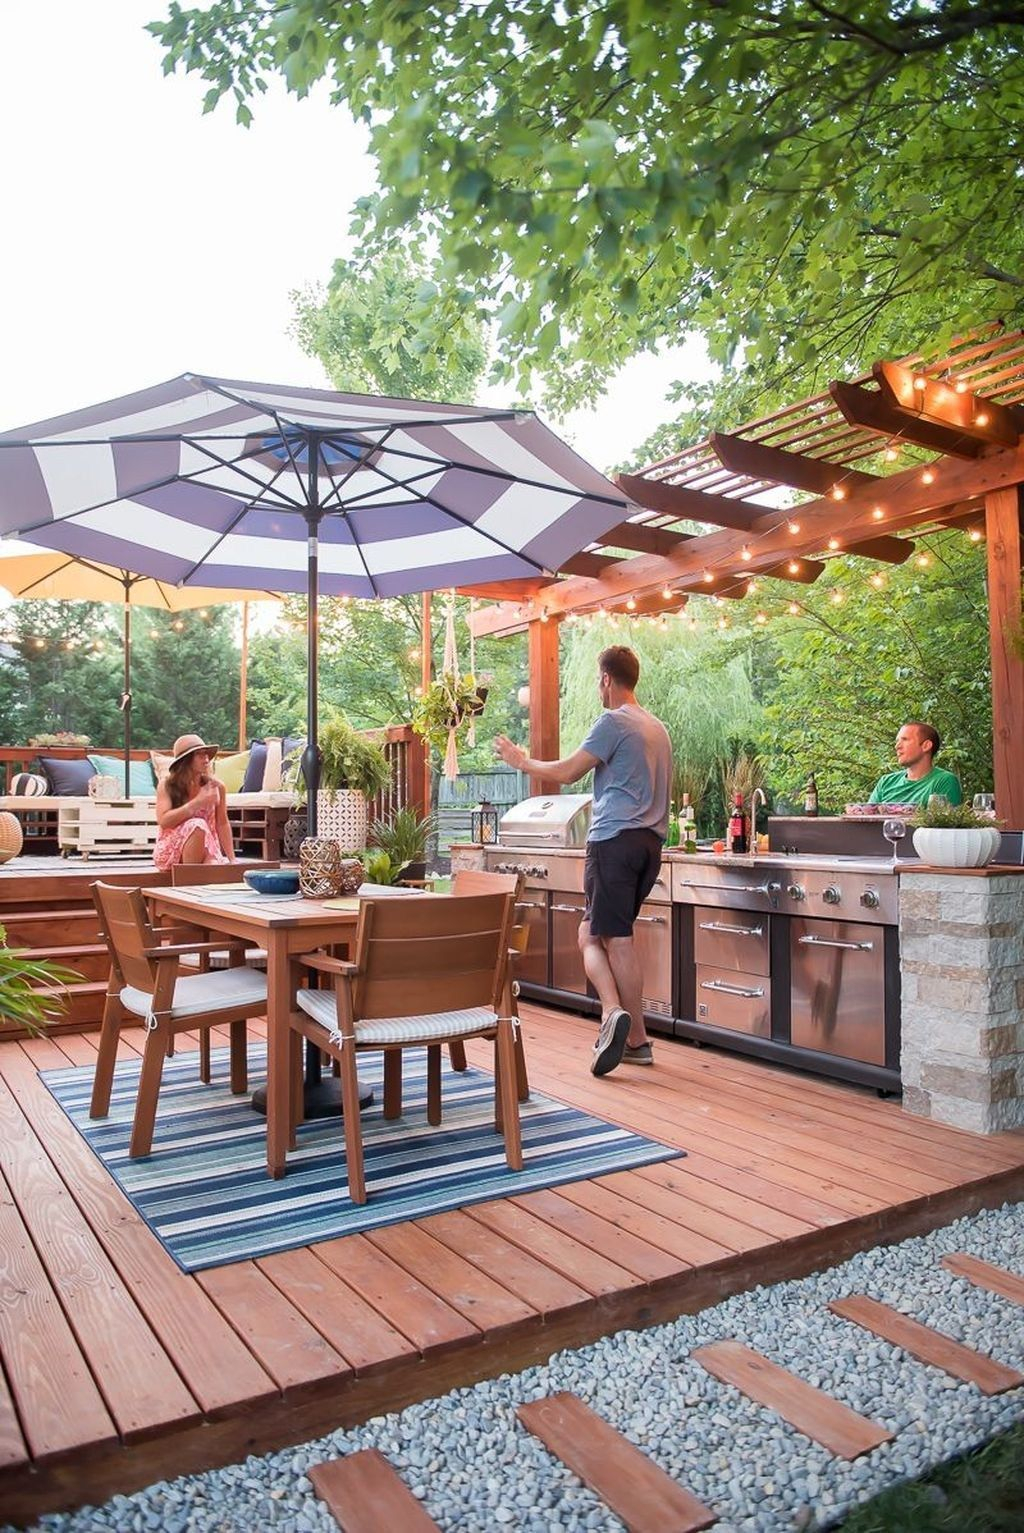 44 Awesome Outdoor Patio Decorating Ideas - BESTHOMISH